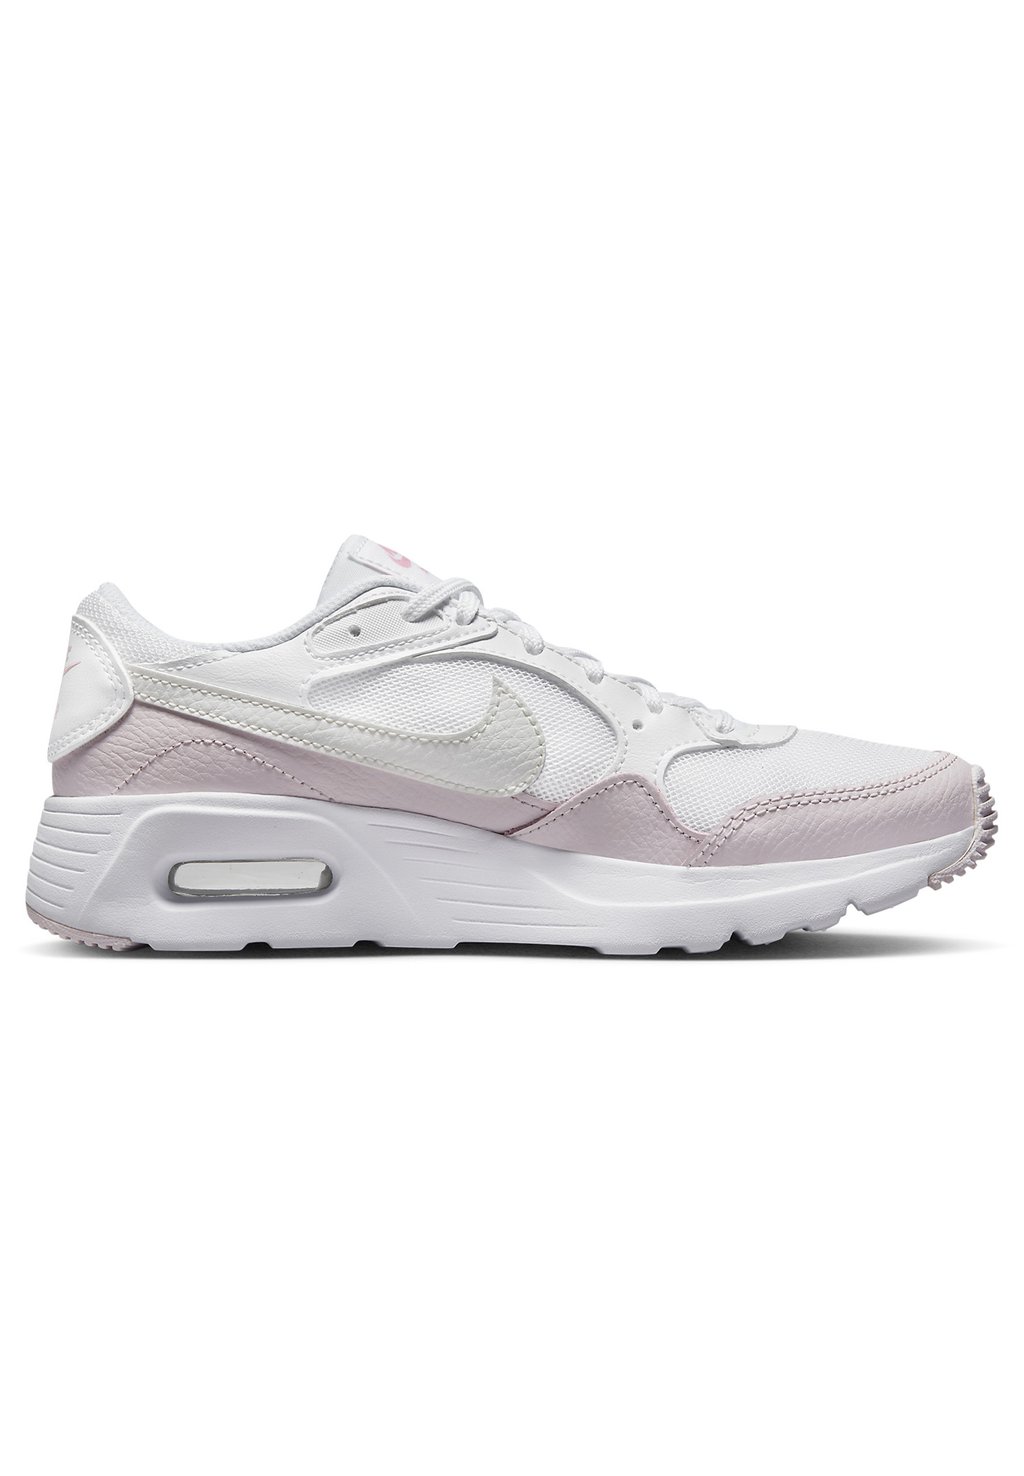 Низкие кроссовки Nike Air Max Sc (Gs) Nike, цвет white/summit white-pearl pink-med soft pink 2019 hot sale wholesale button pearl freshwater pearl aaa 8 8 5mm white pink purple button pearl